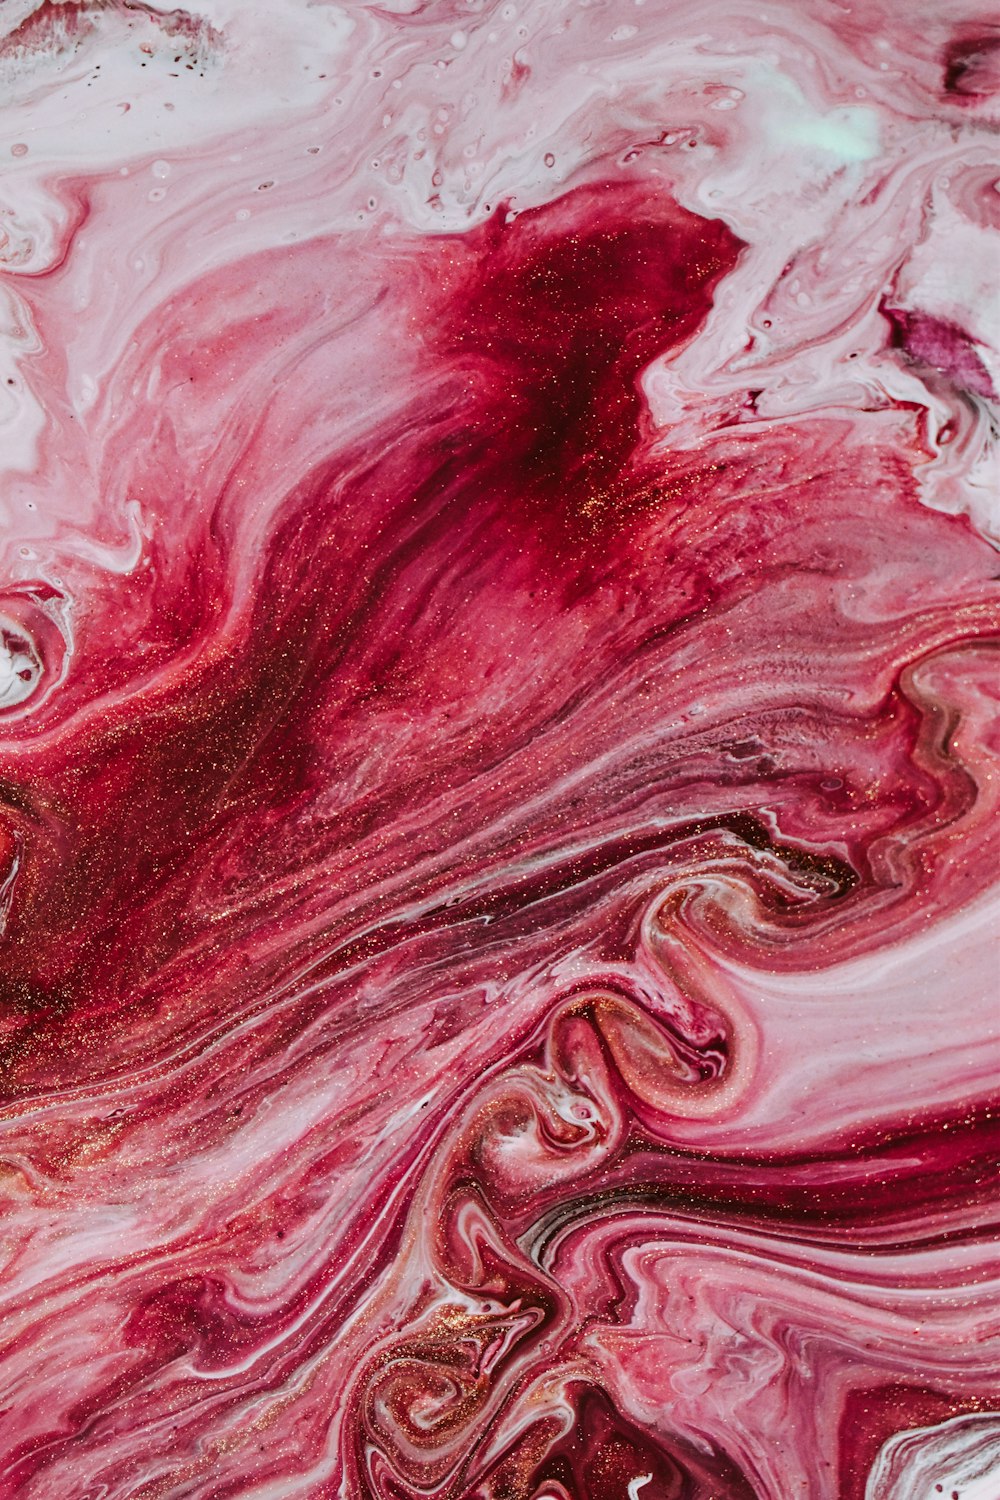 red and white abstract painting photo – Free Painting Image on Unsplash